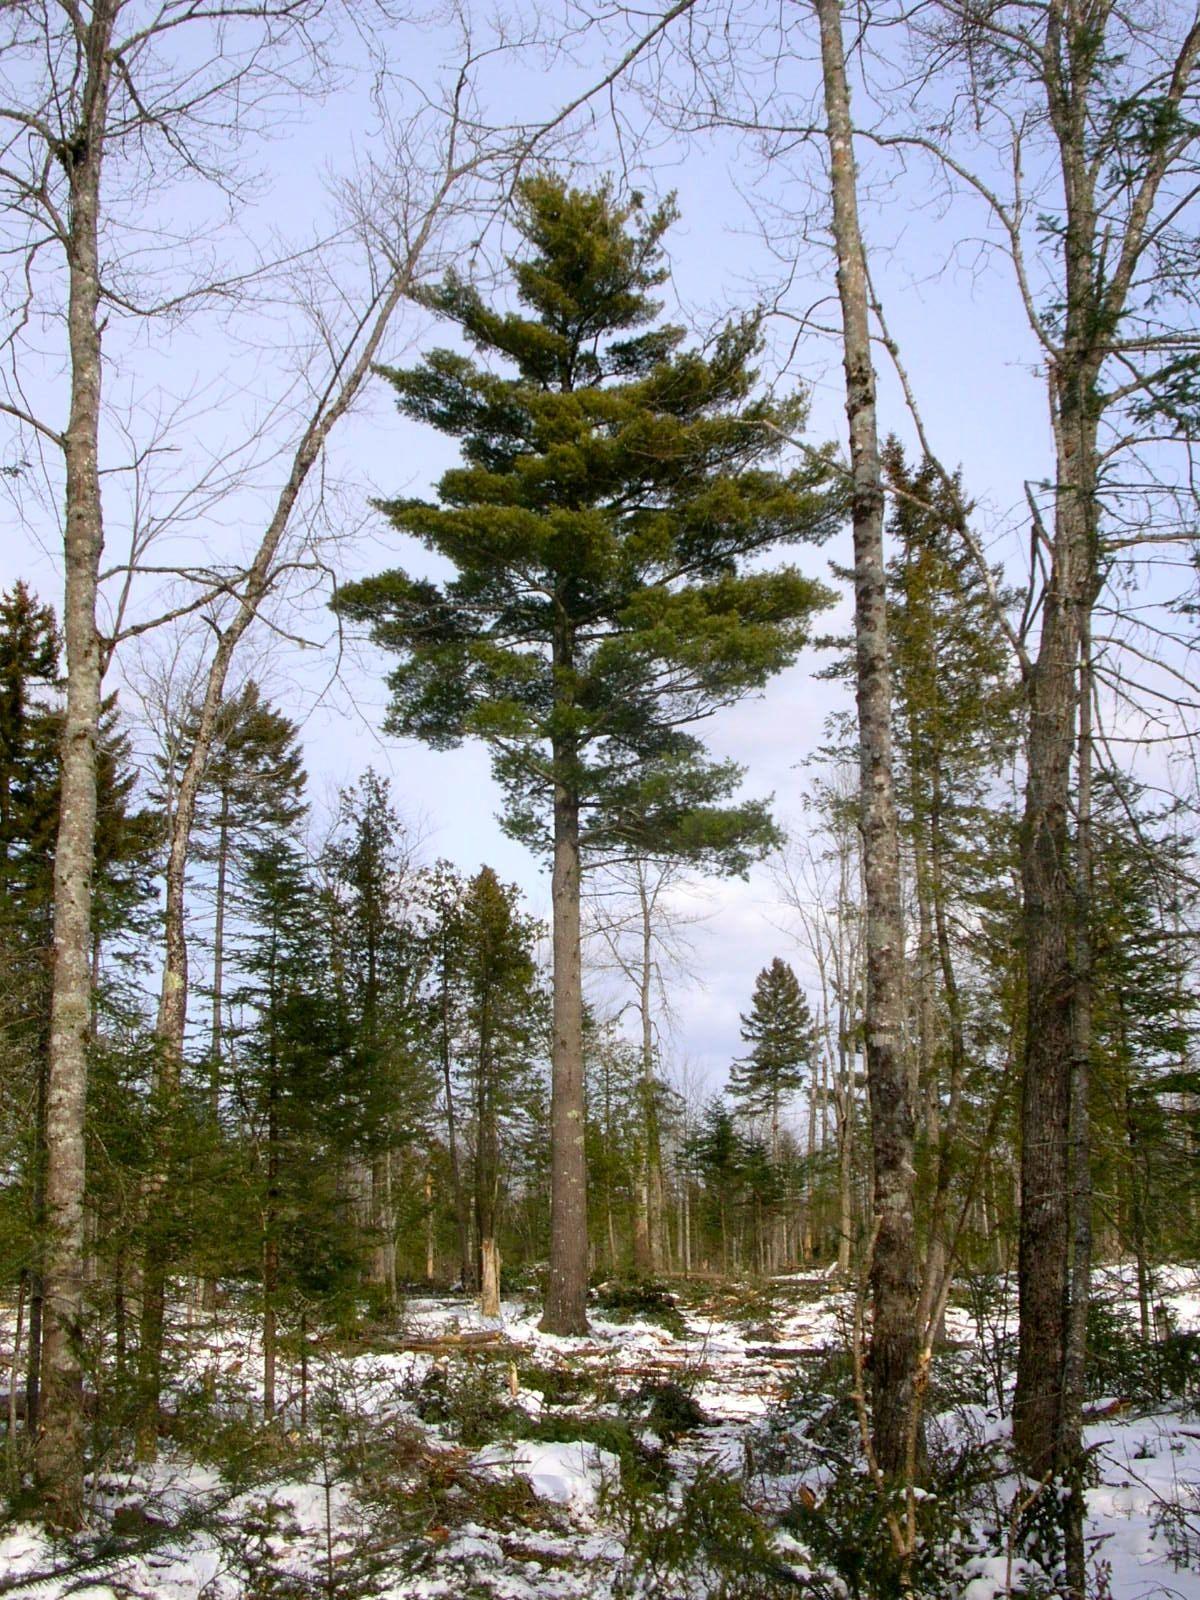 Pine Tree Maine Logo - Forests for Maine's Future from the Woods Journal